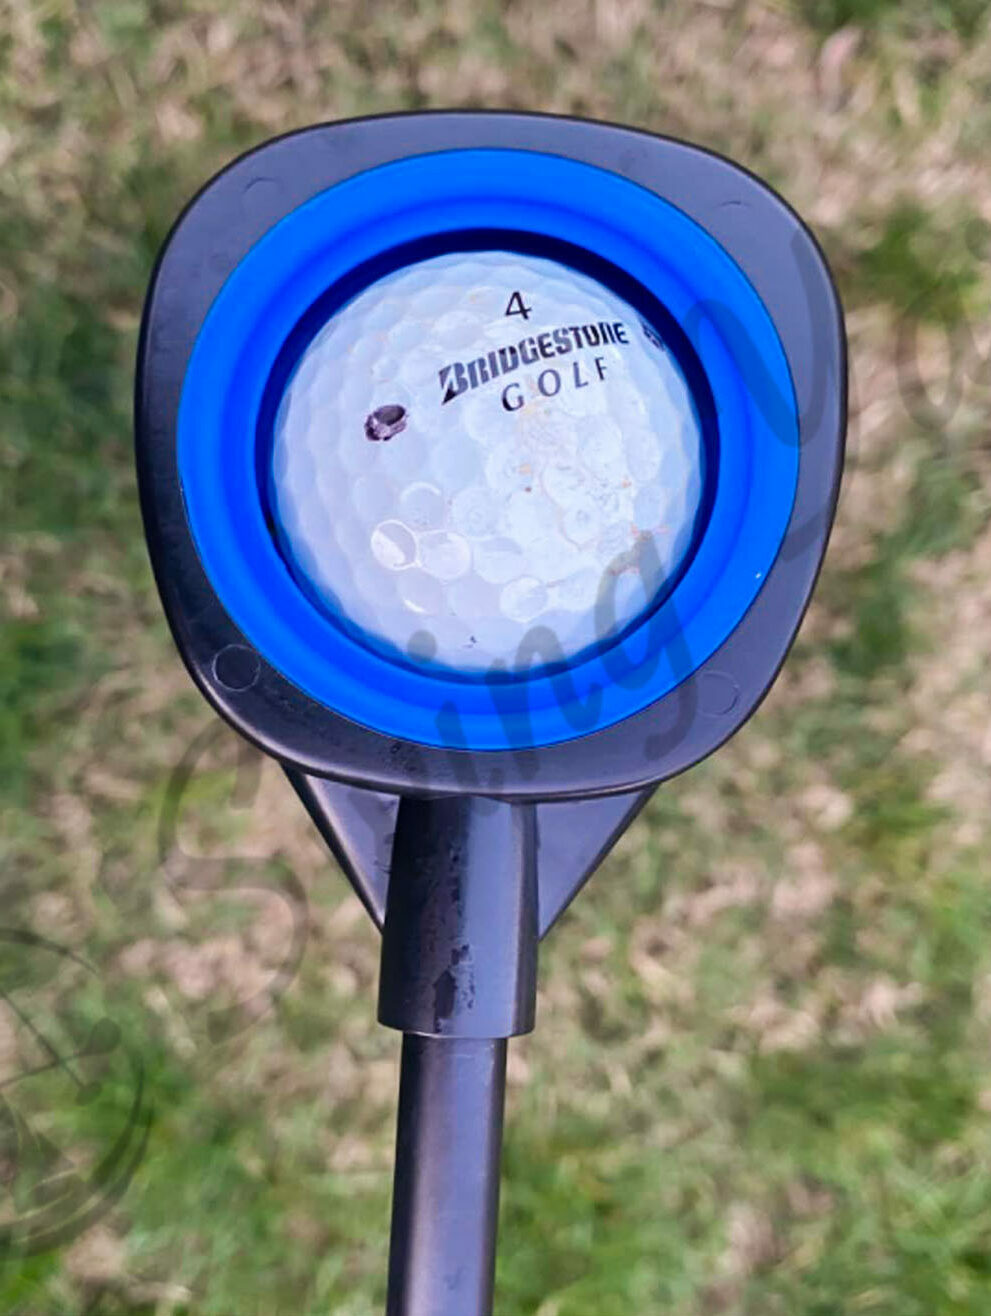 A Champkey Two Sided Golf Ball Retriever for tested at the golf course